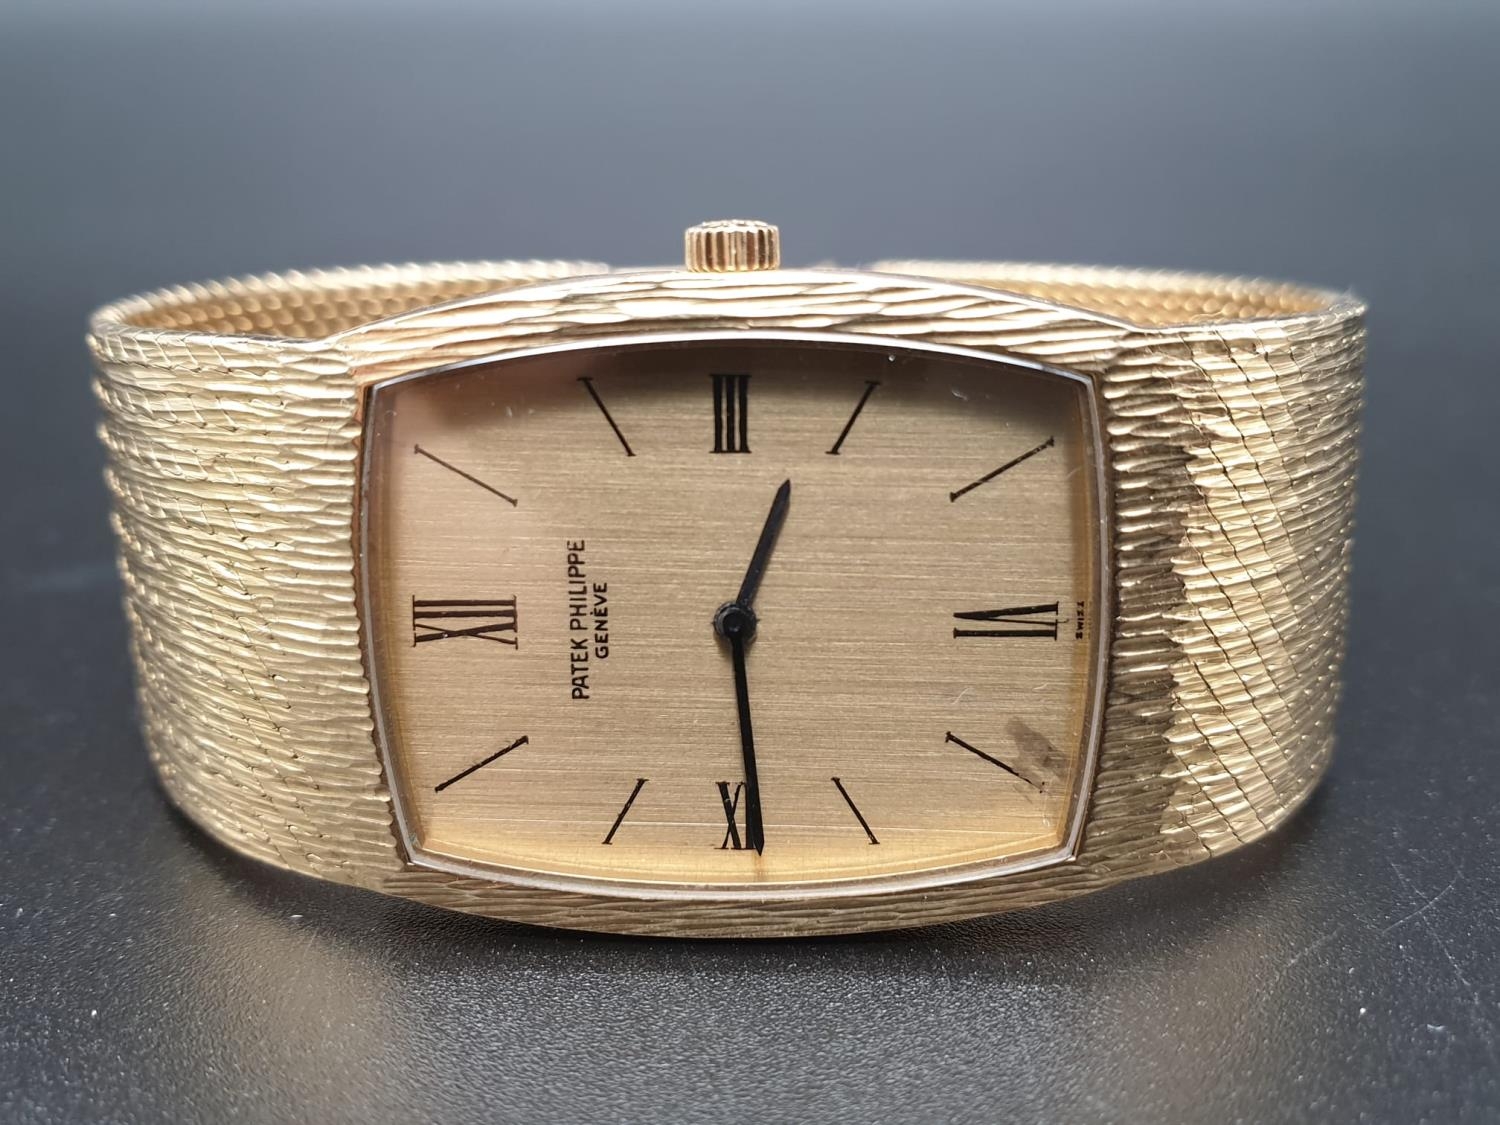 AN 18K GOLD PATEK PHILIPPE DRESS WATCH WITH SOLID GOLD BARKED STRAP. 28MM - Image 4 of 11